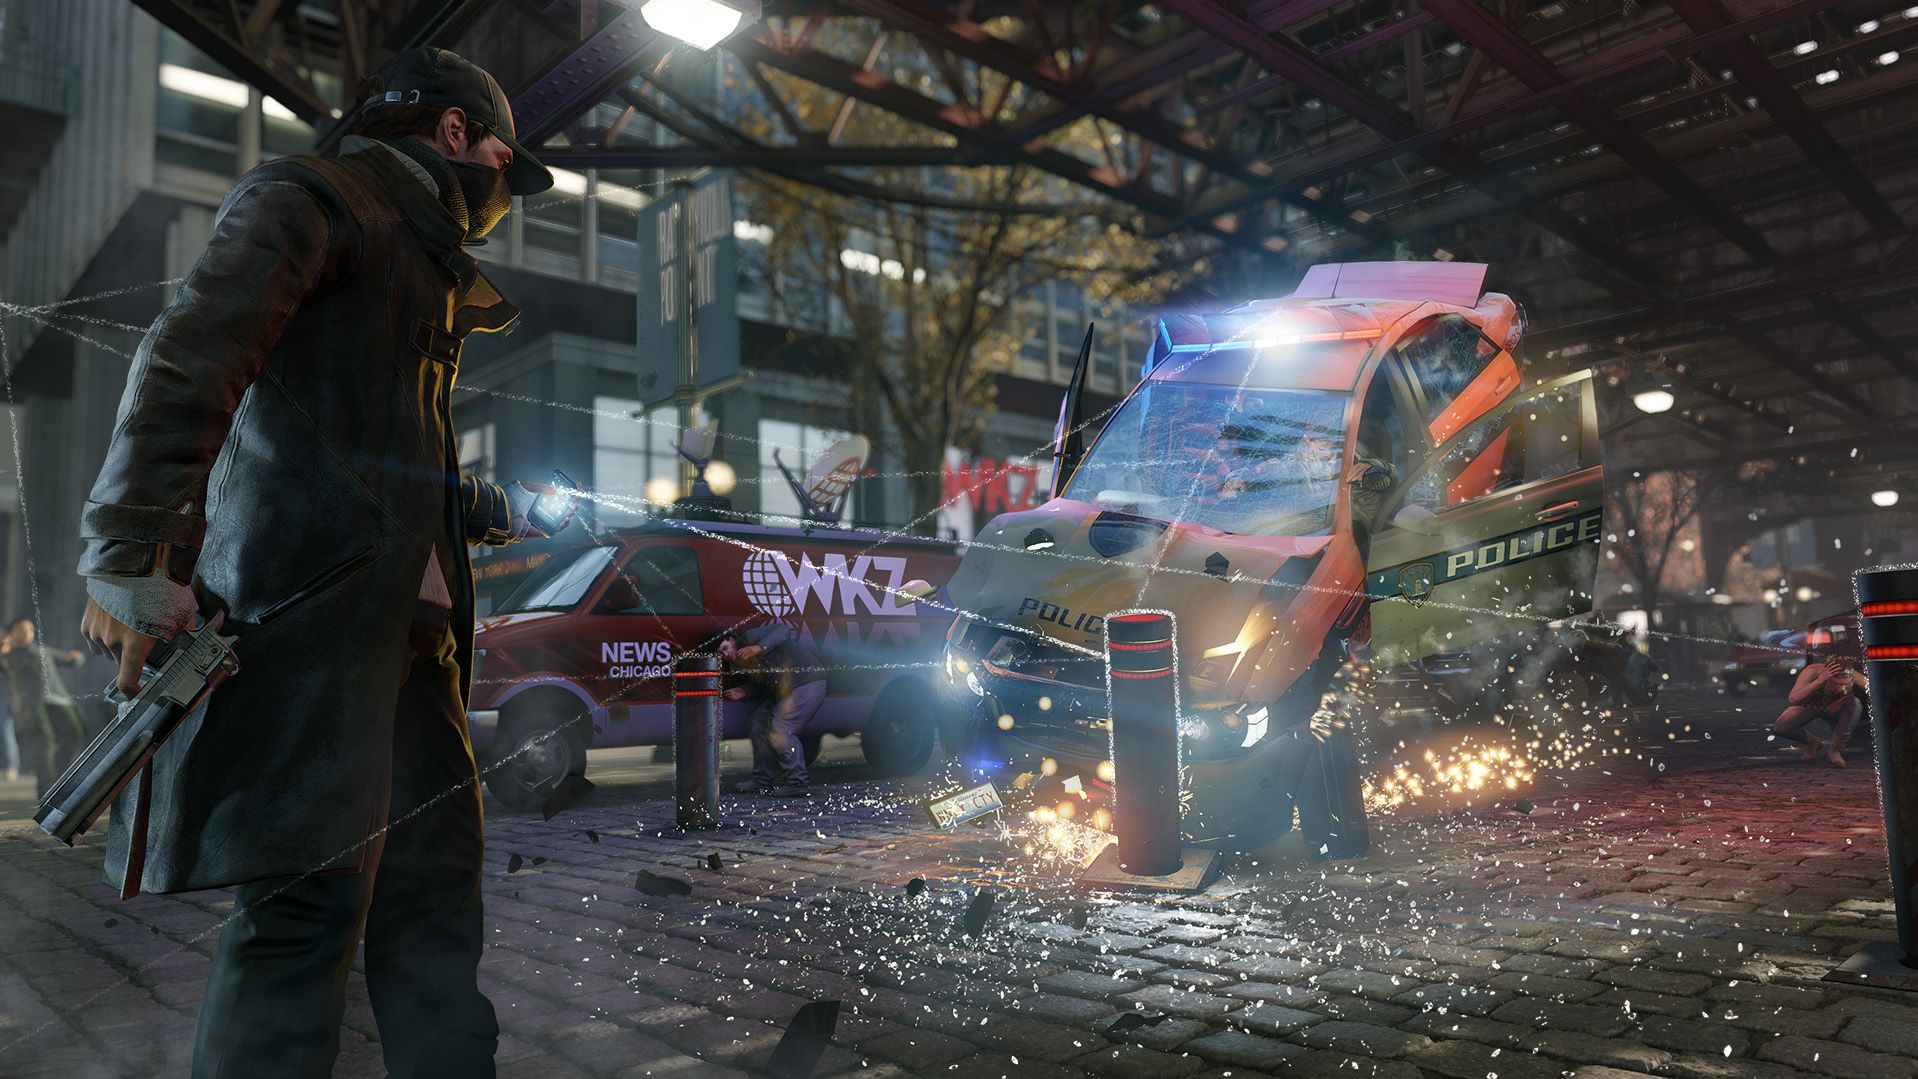 interview watch dogs creative director talks next gen the future of gaming apps and more image 1